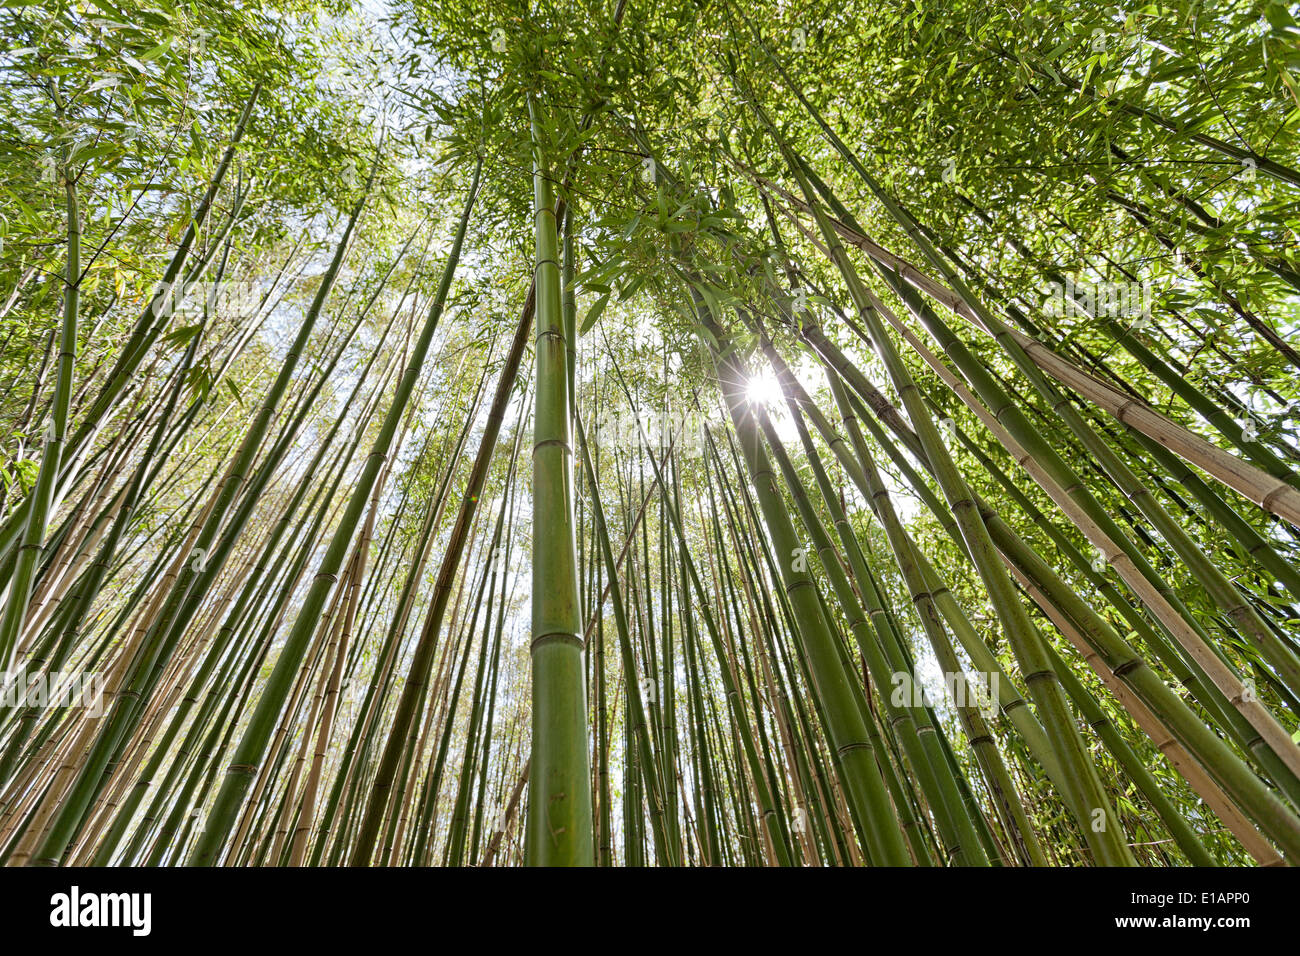 Bamboo forest. Stock Photo